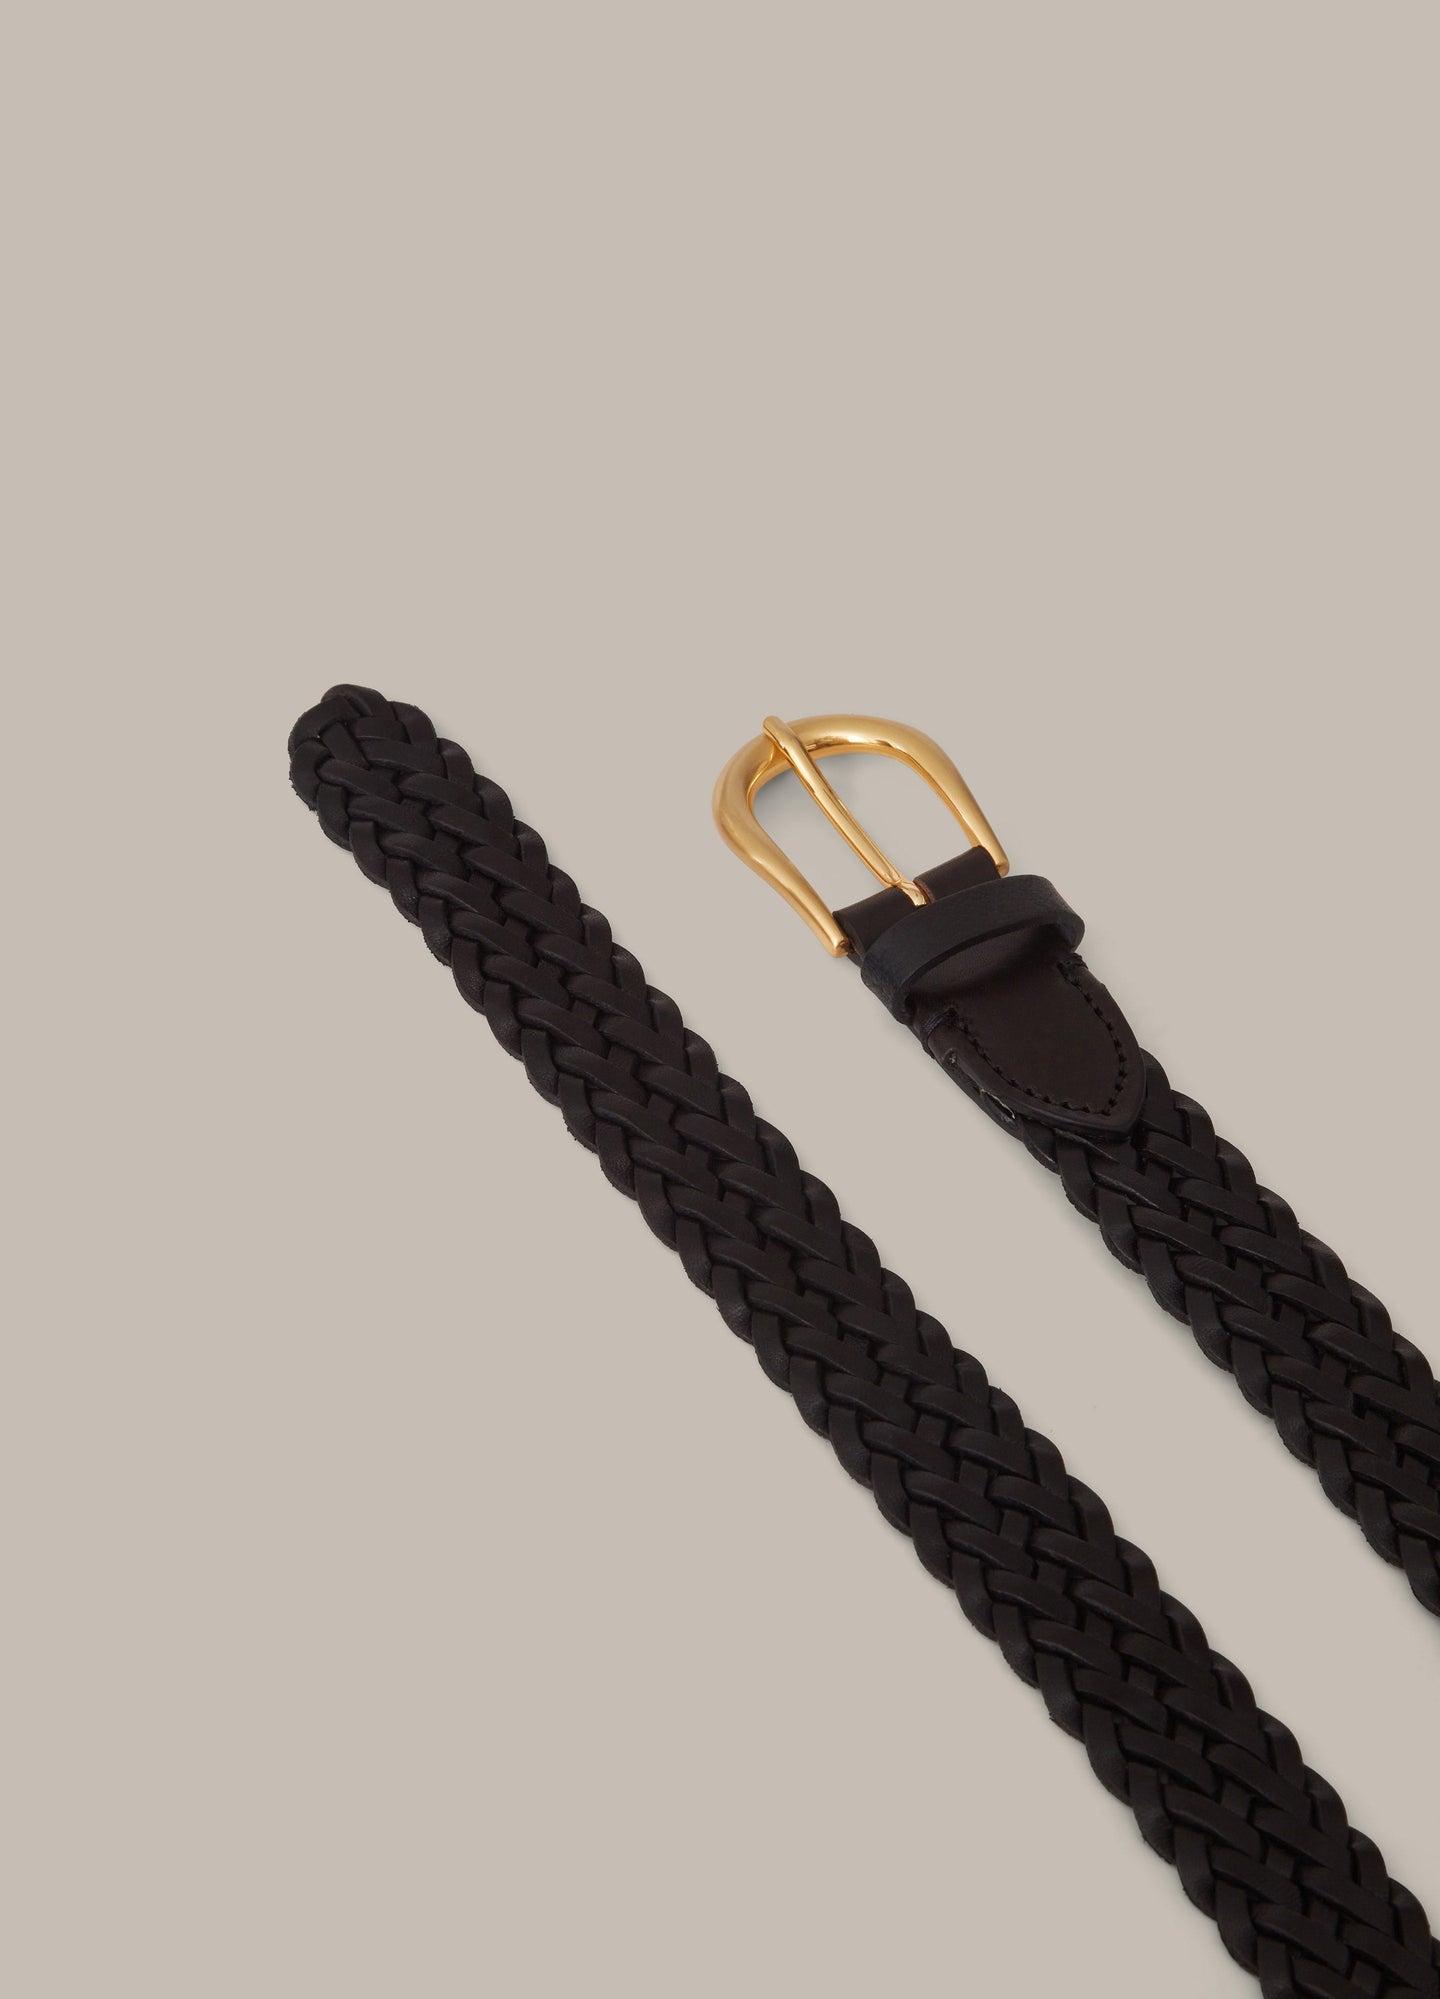 Braided Leather Belt Handcrafted Real Full Grain Black Braid Belts for Man  and Woman Belts Elegant Stylish Uniqe Black Braided Leather -  Australia